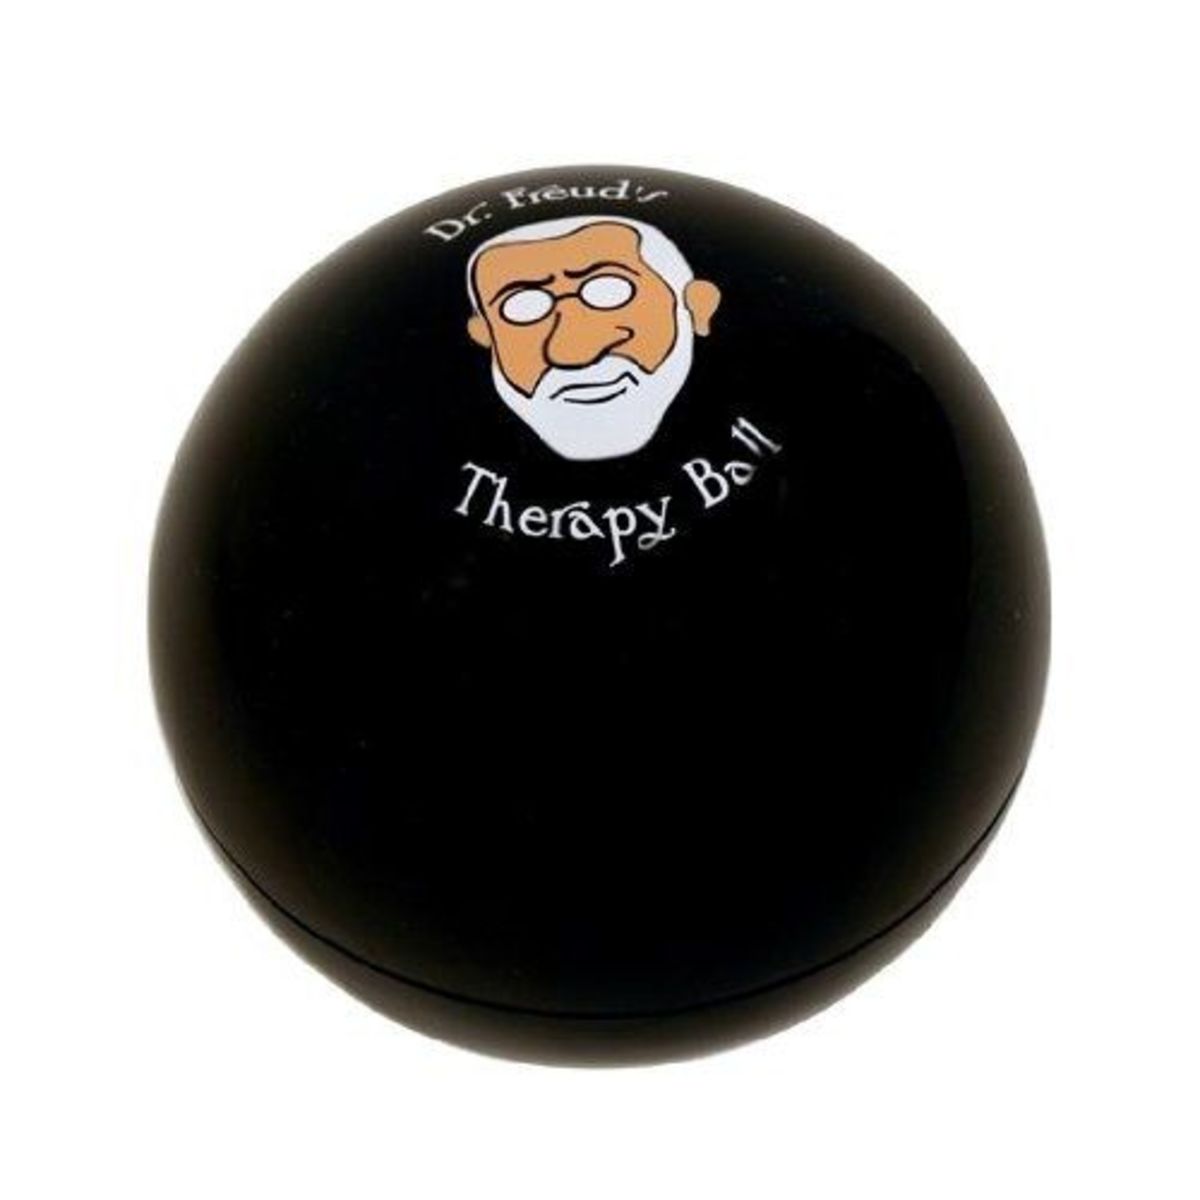 Dr. Freud's Therapy Ball